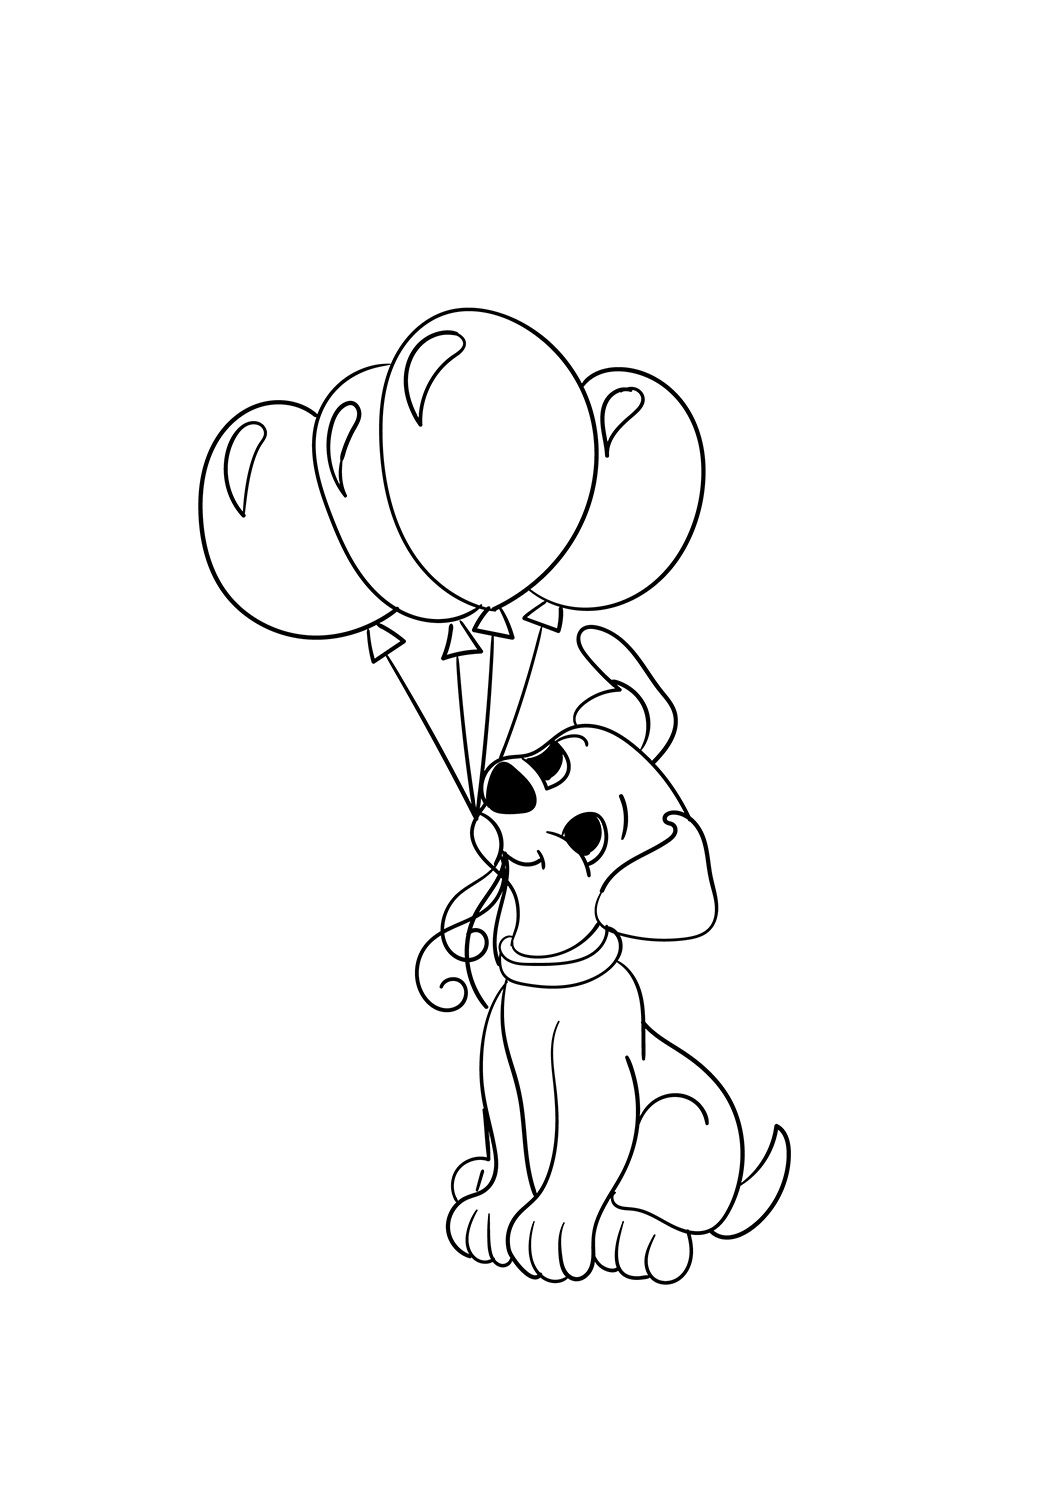 Puppy With Balloons Coloring Page   Free Printable Coloring Pages for Kids